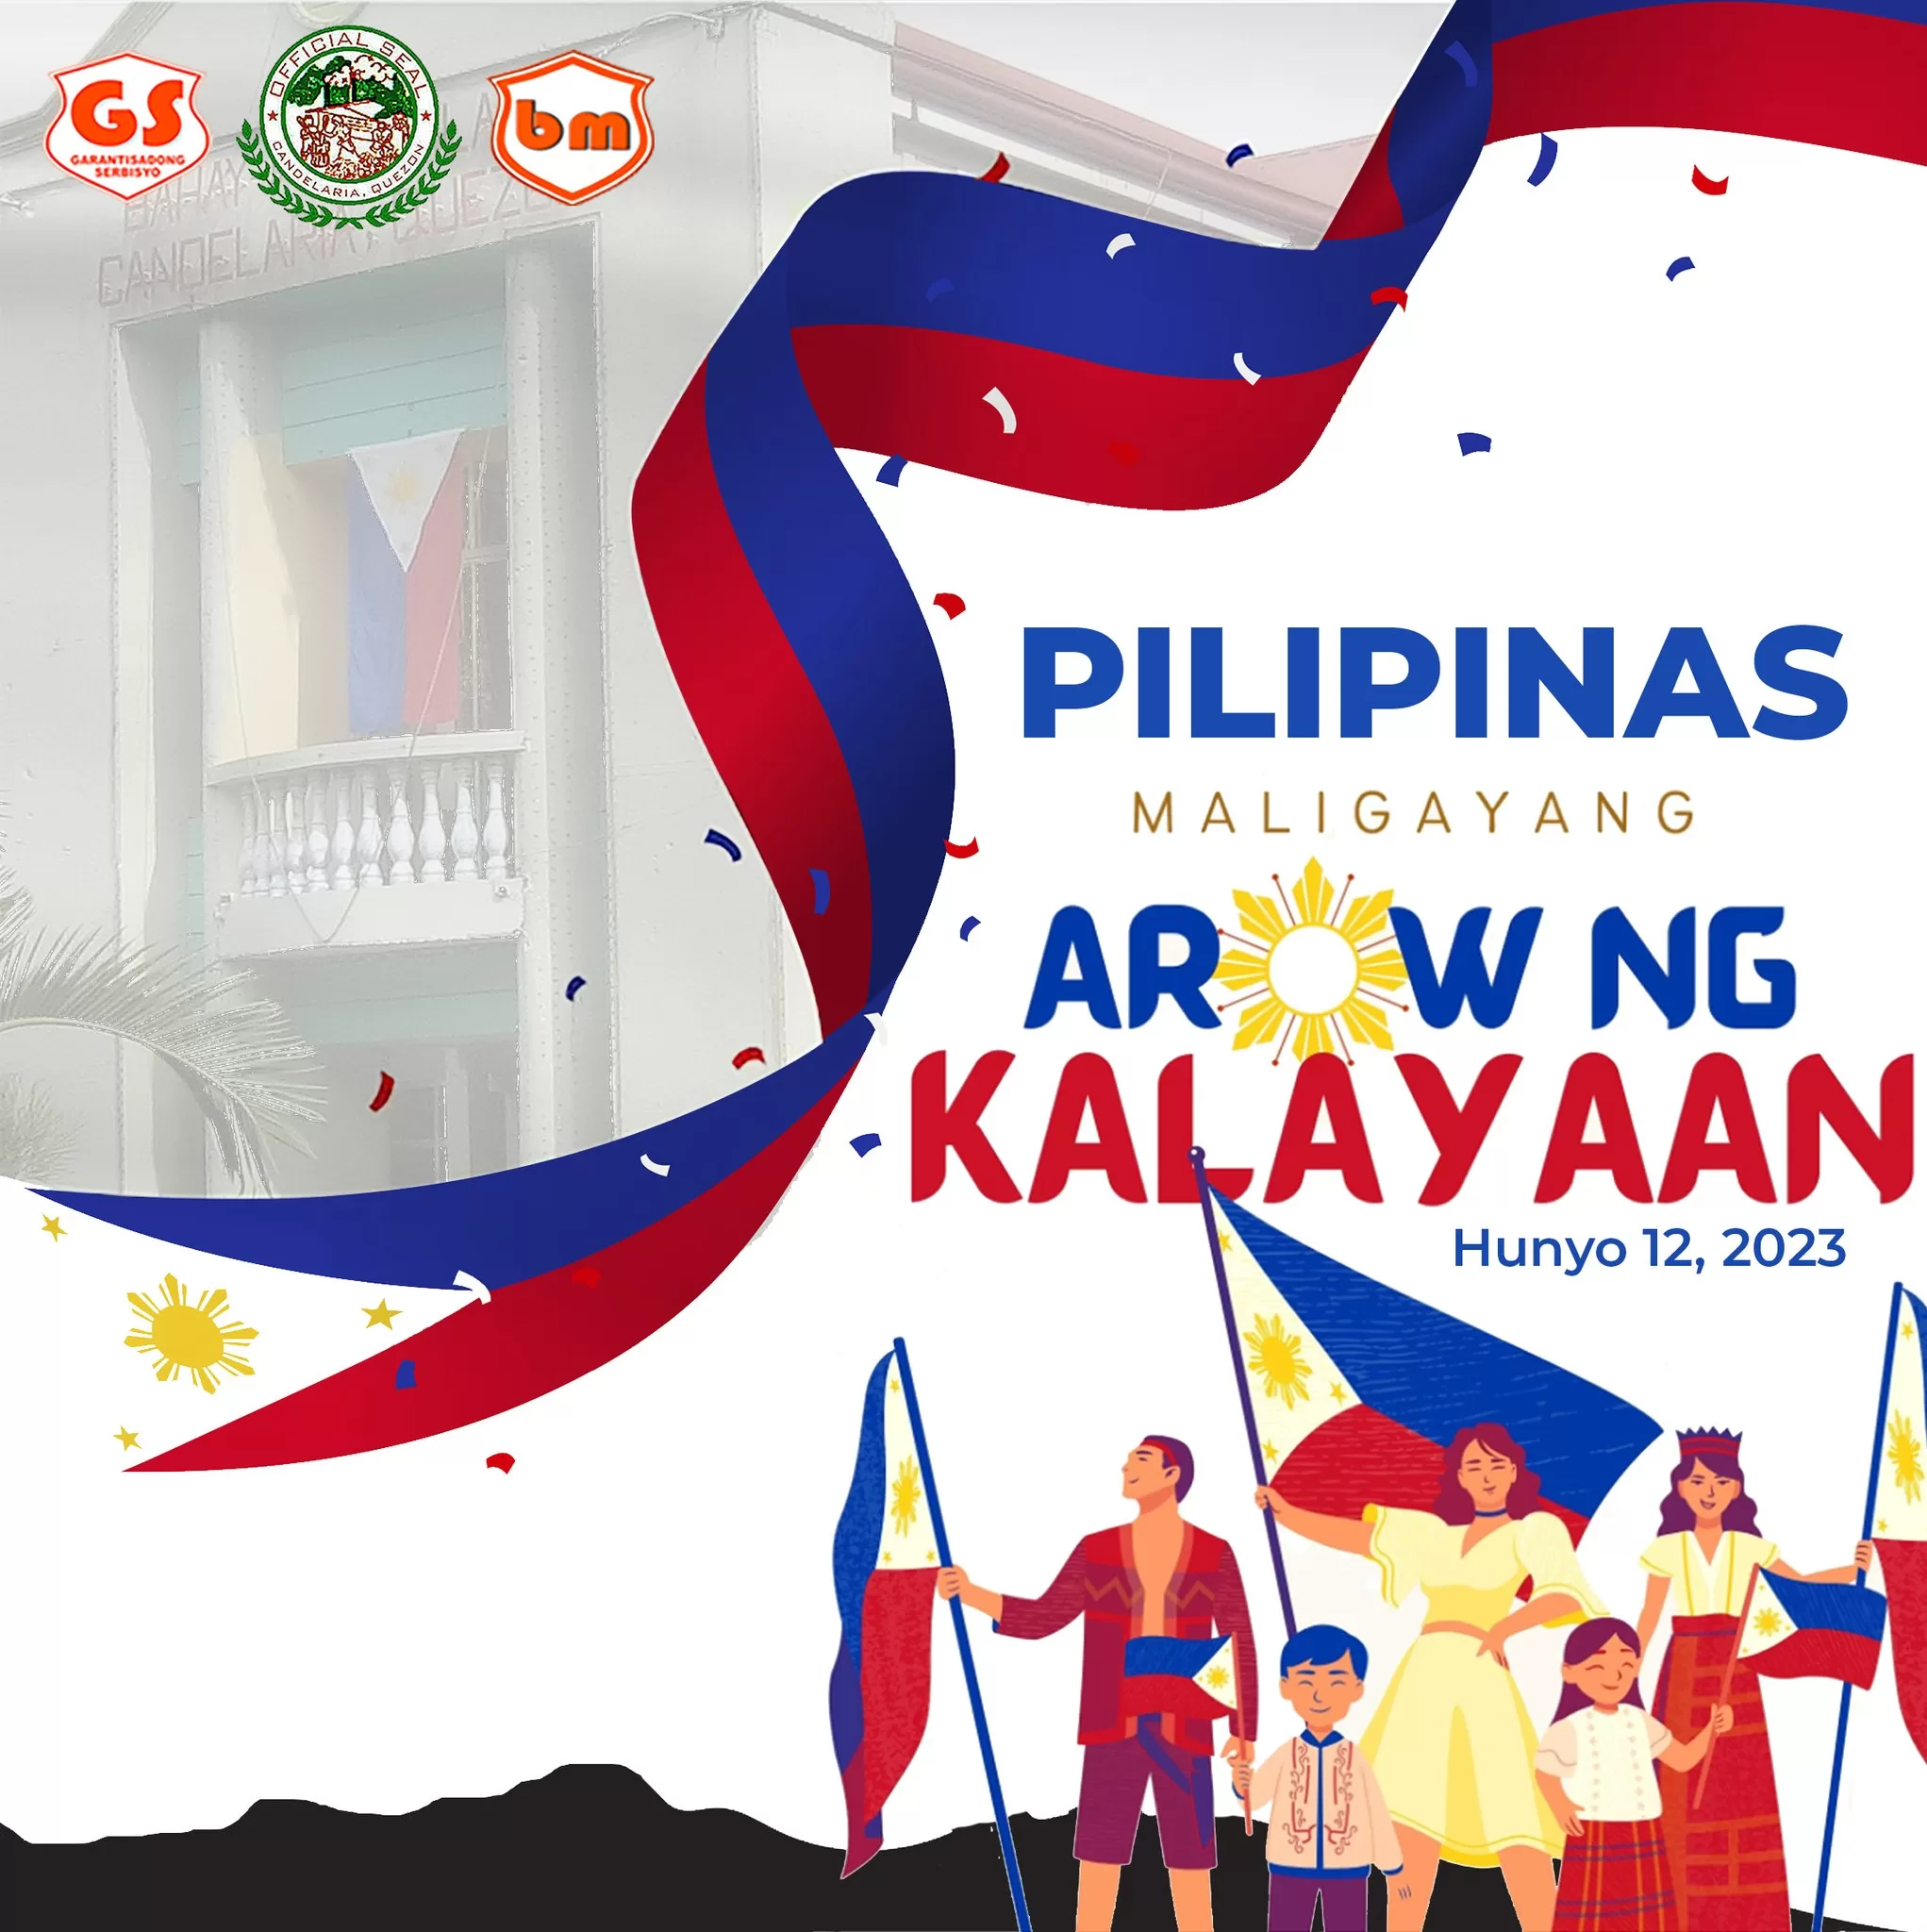 Araw Ng Kalayaan The Official Website Of The Municipality Of Candelaria Quezon